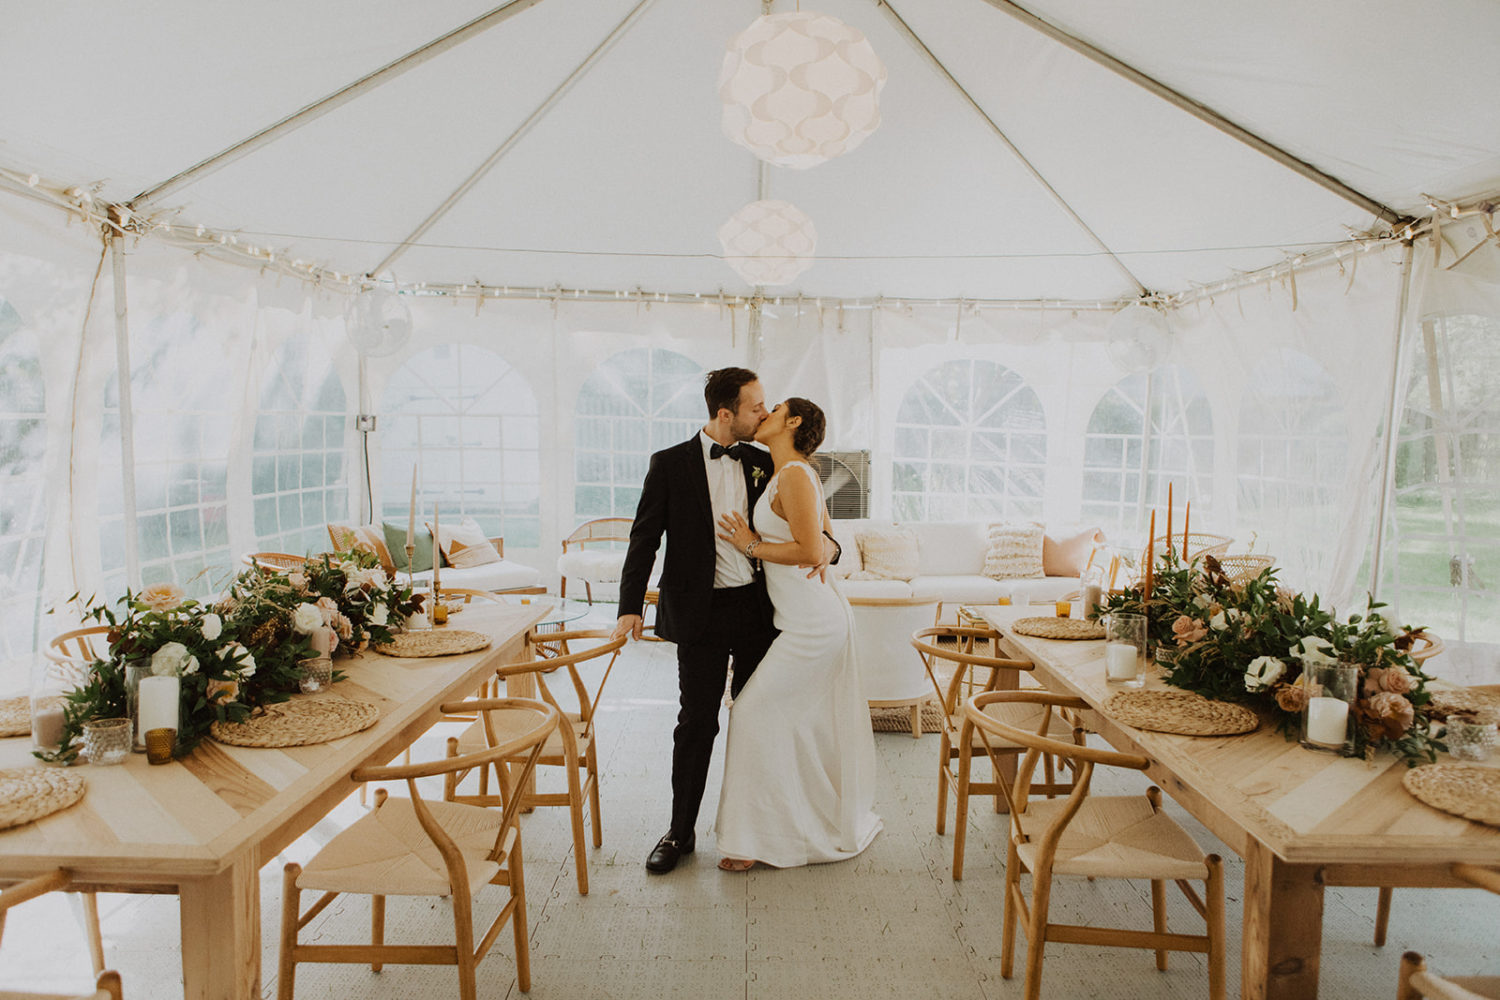 Couple kisses in reception tent at backyard wedding